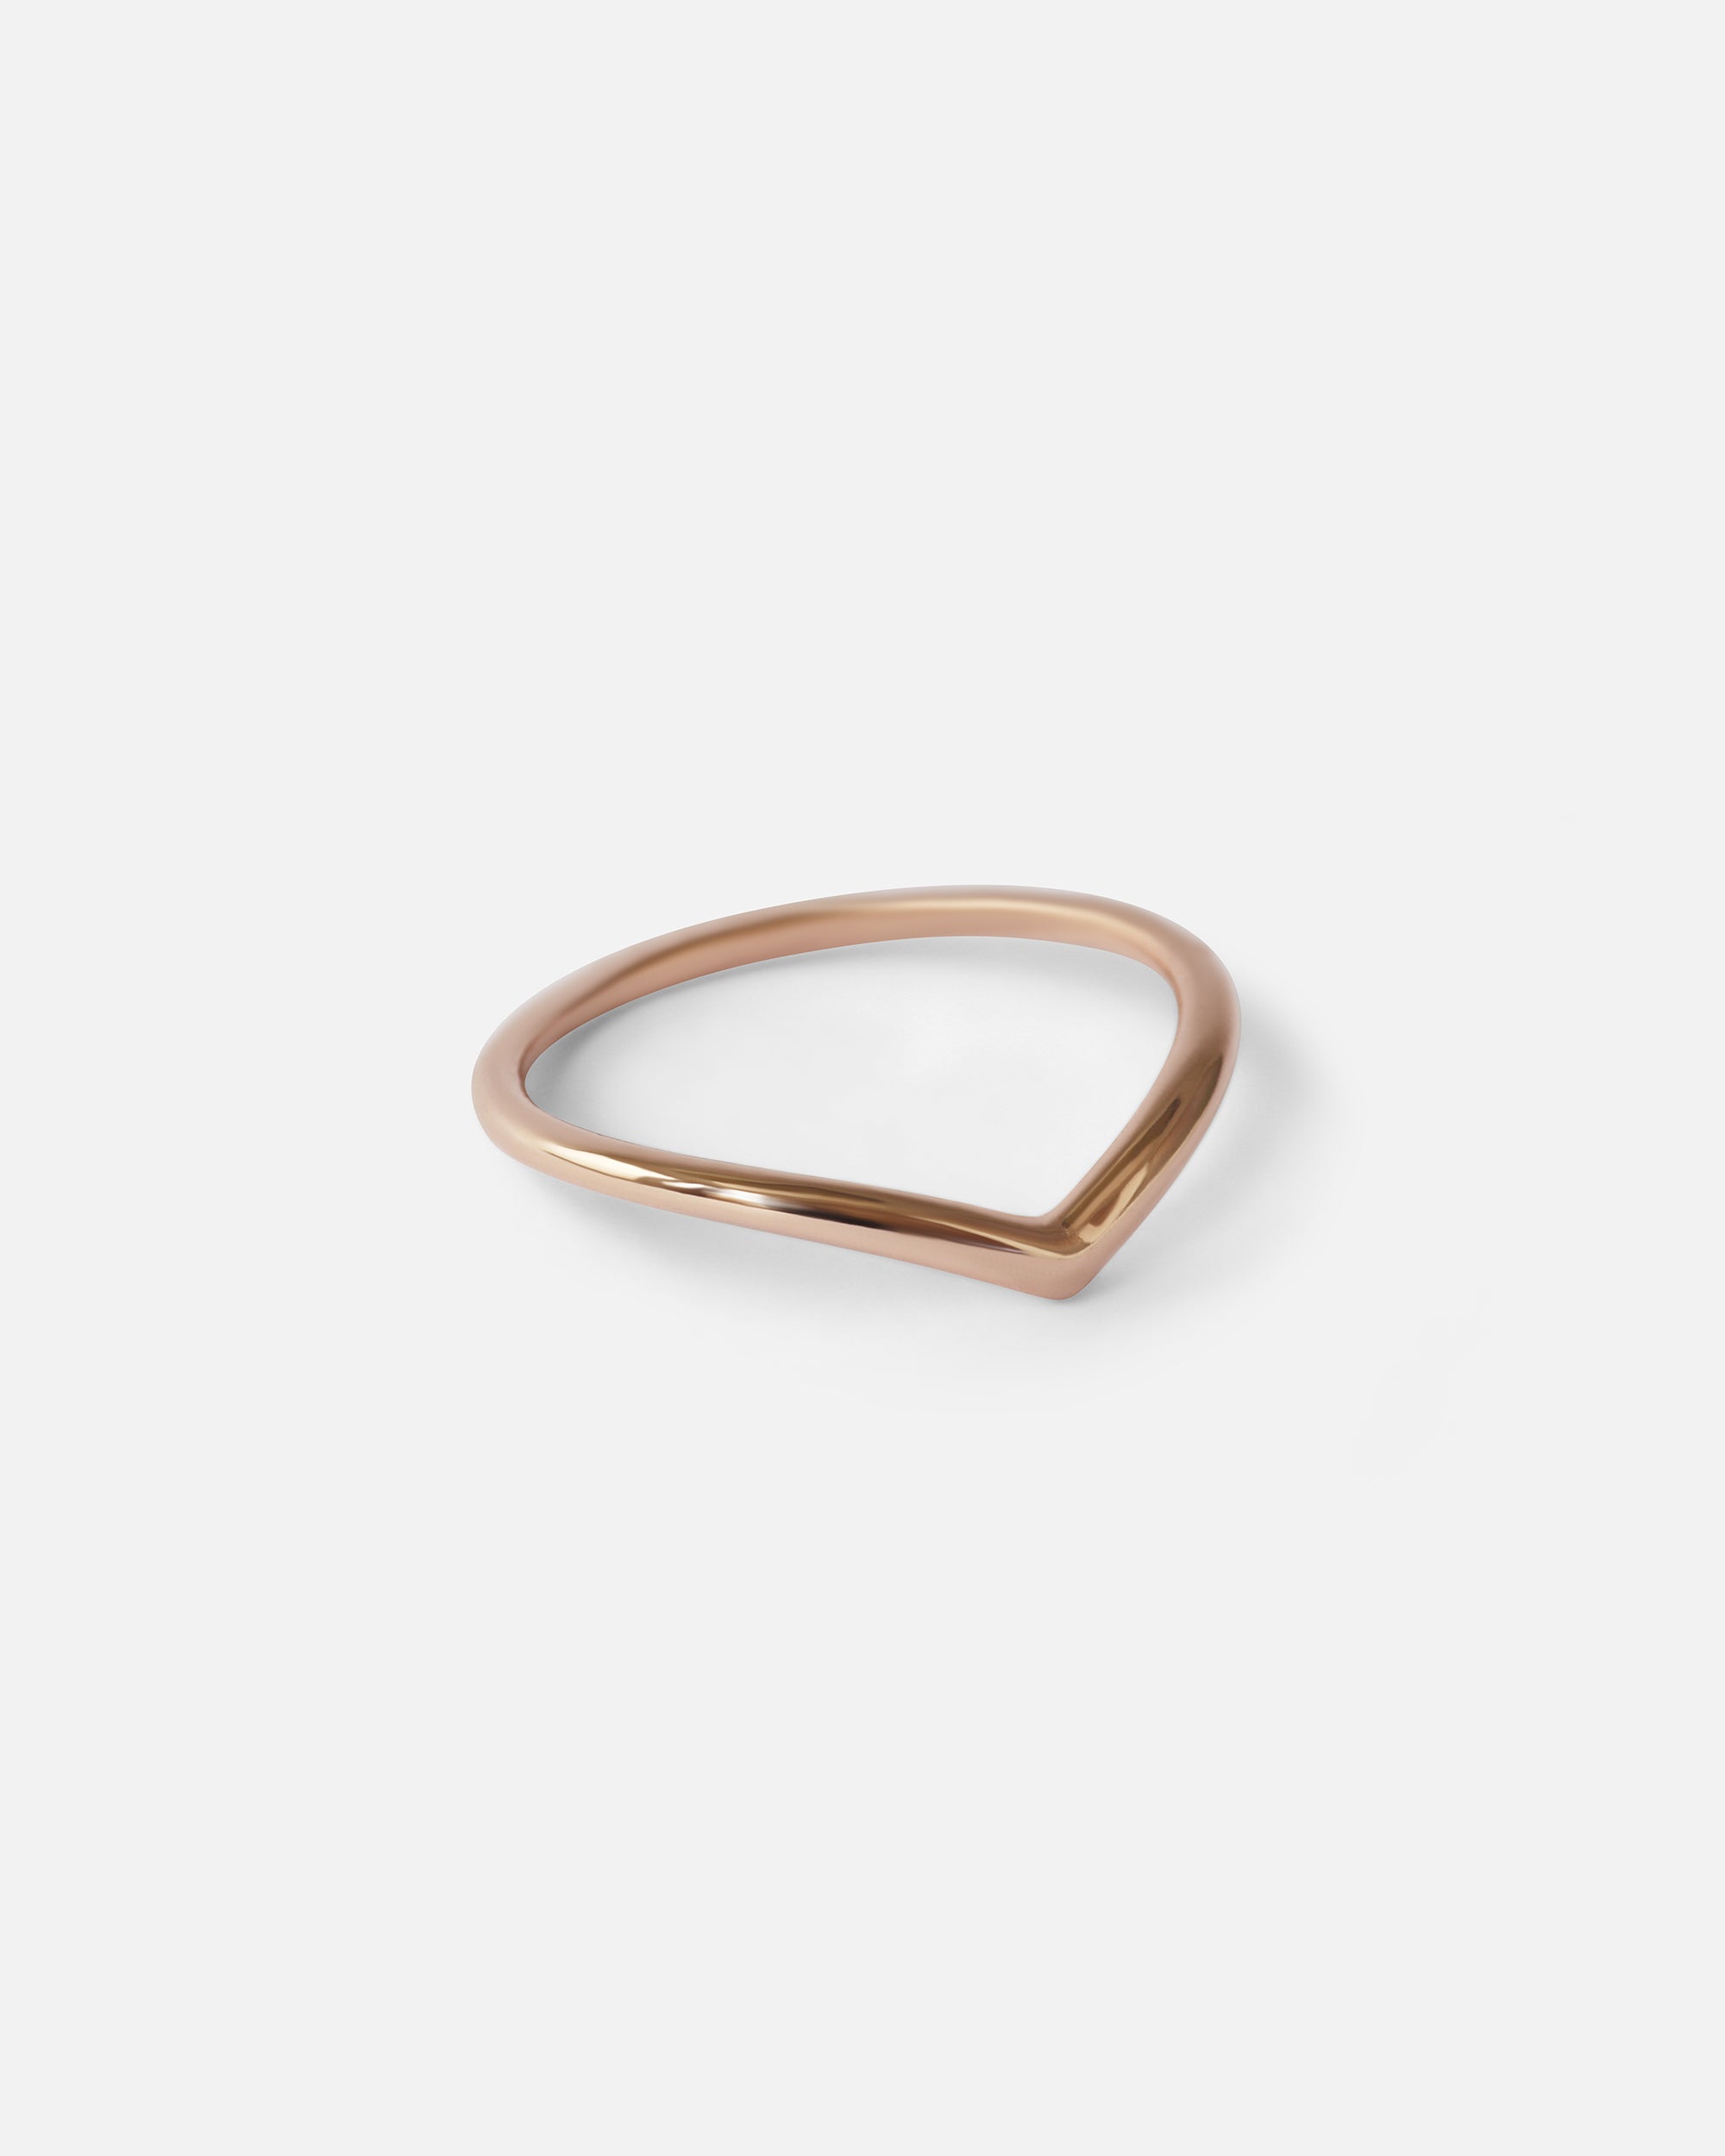 Archer / Ring Made To Order 14k Rose Gold State At Checkout By Katrina La Penne in rings Category